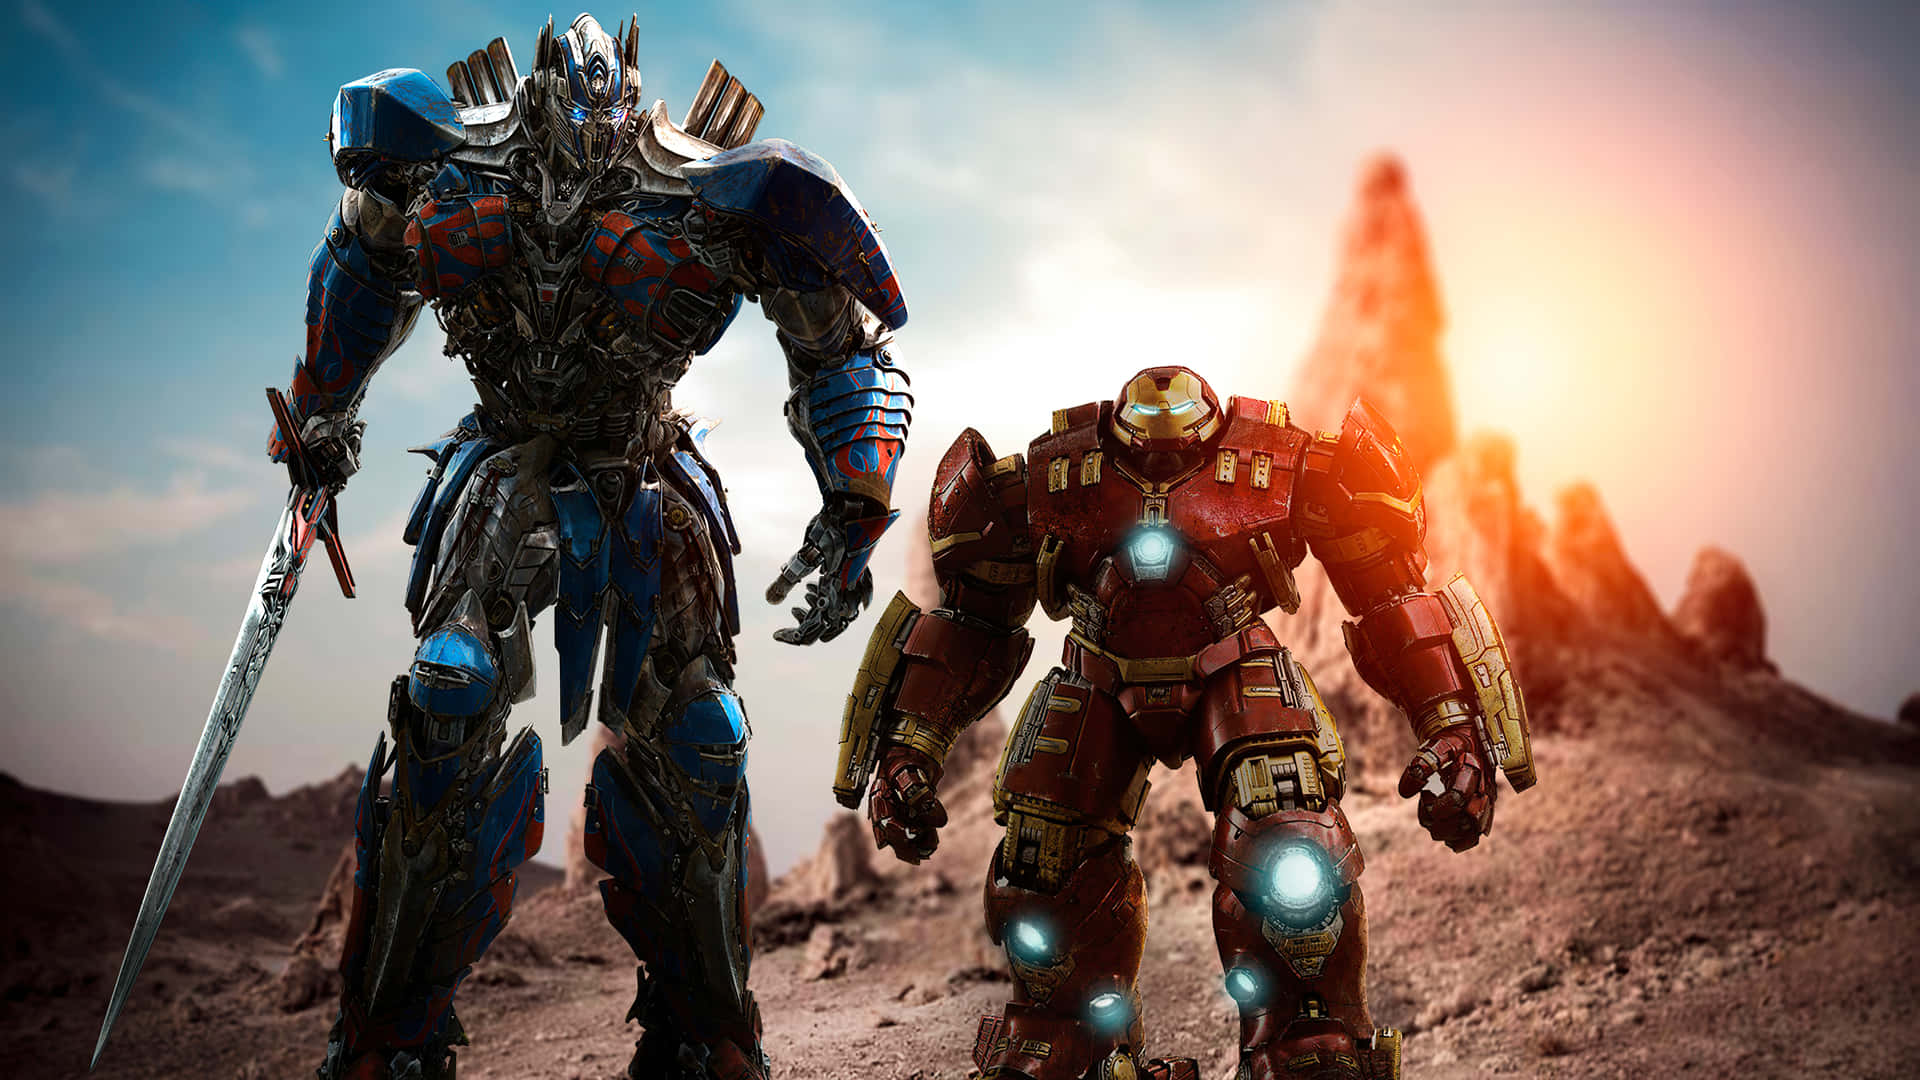 Get closer to the heroic action with the amazing Optimus Prime 4K wallpaper Wallpaper